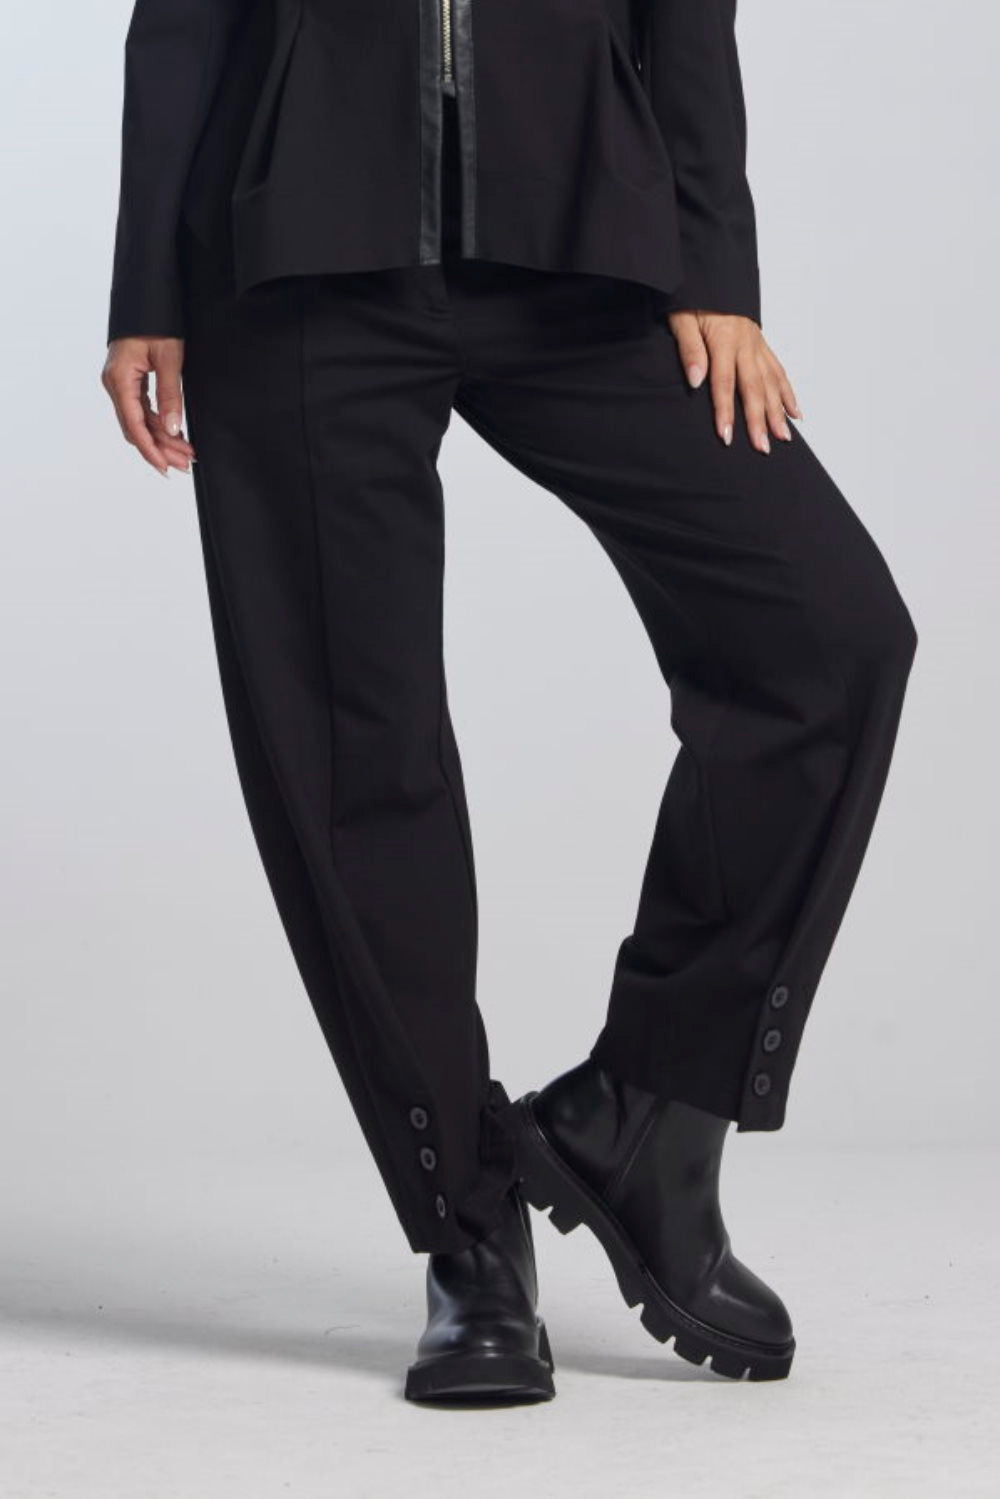 Paula Ryan Roma Buttoned Officer Pant